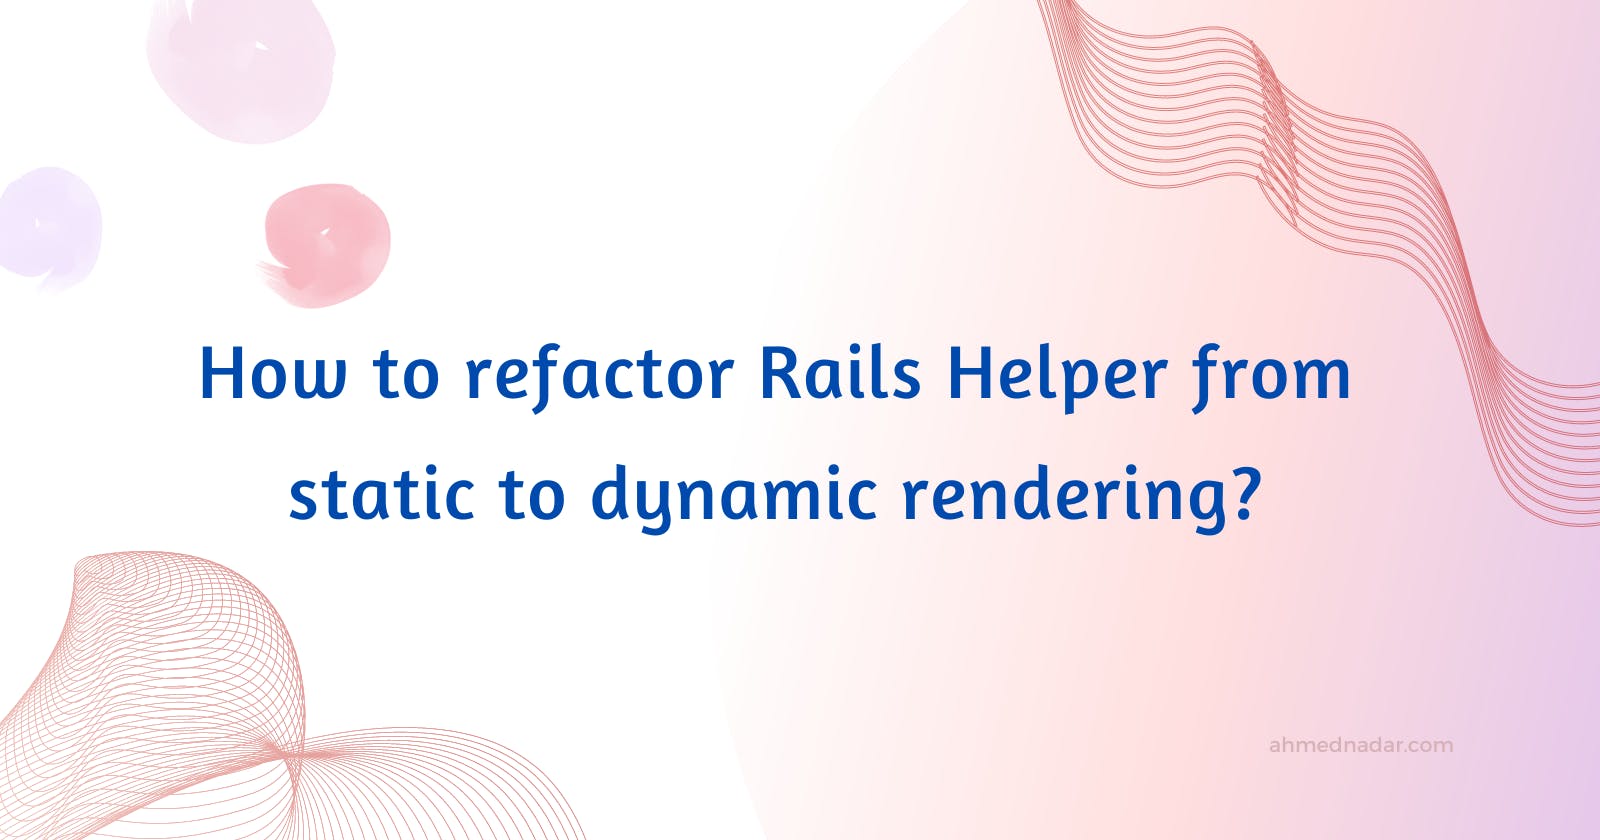 Refactoring Rails Helpers from static to dynamic rendering